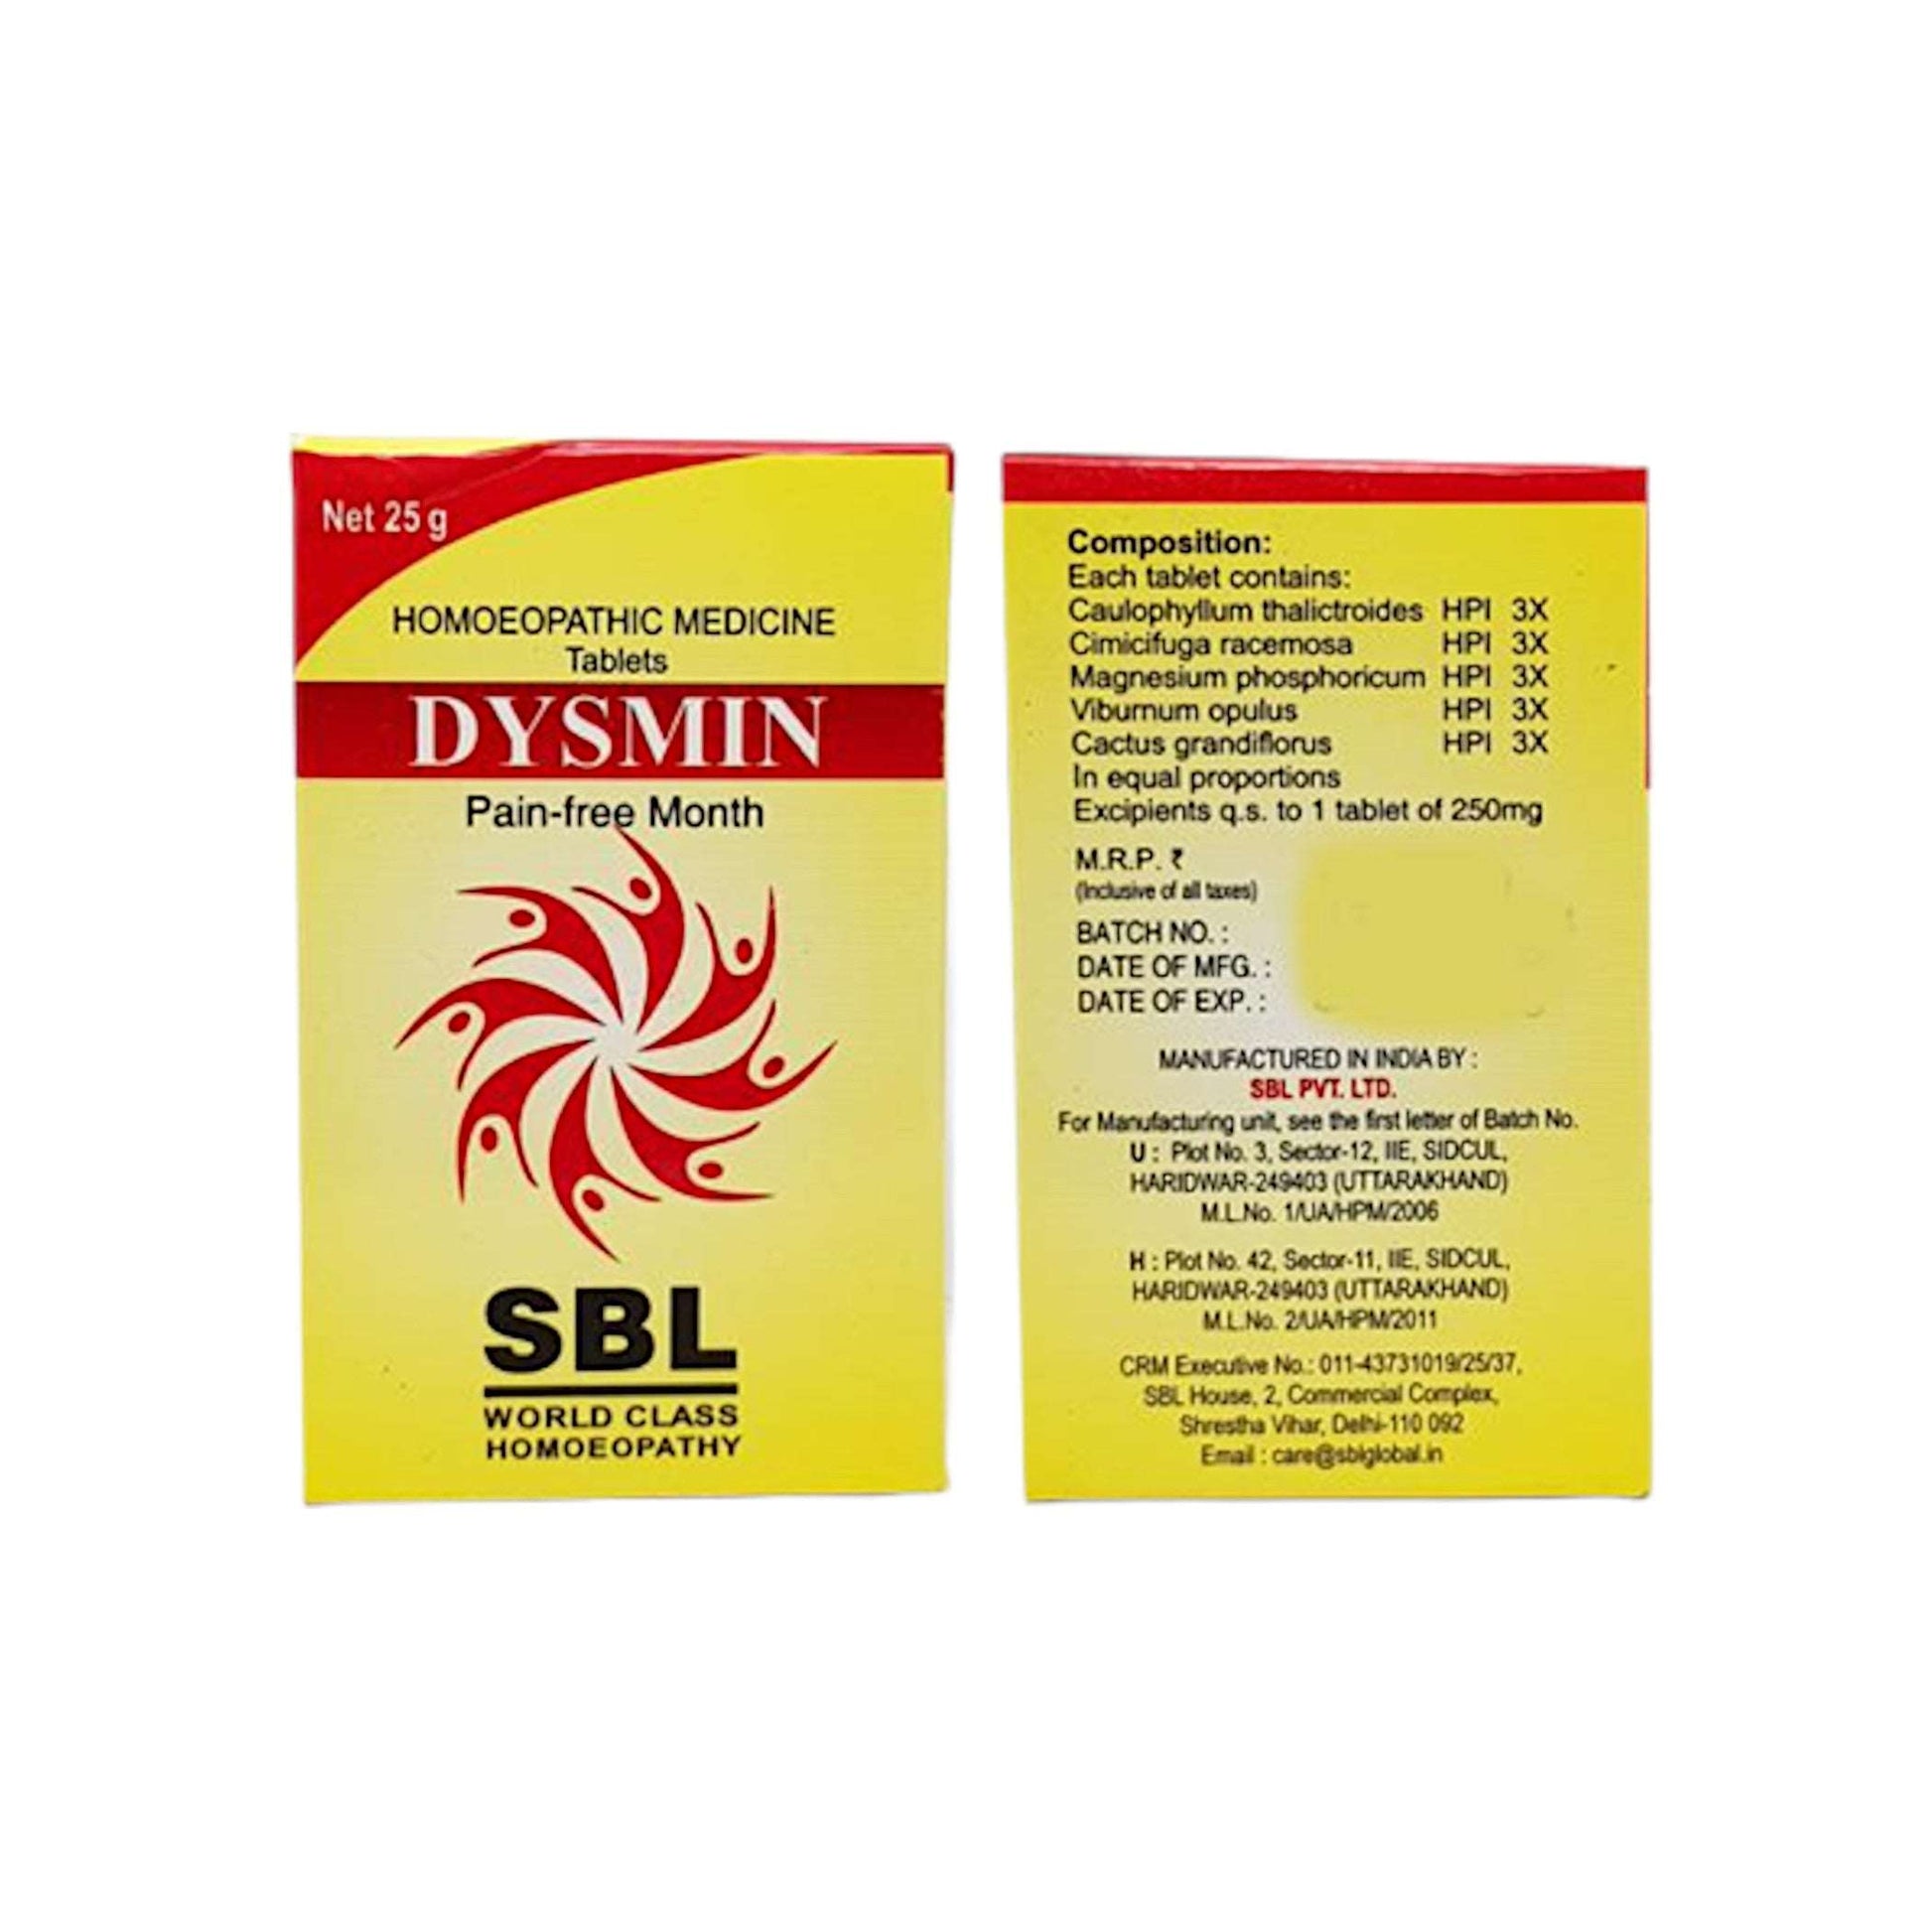 Image: SBL Dysmin Tablets 25 g - Effective Relief for Menstrual Pain and Aches.